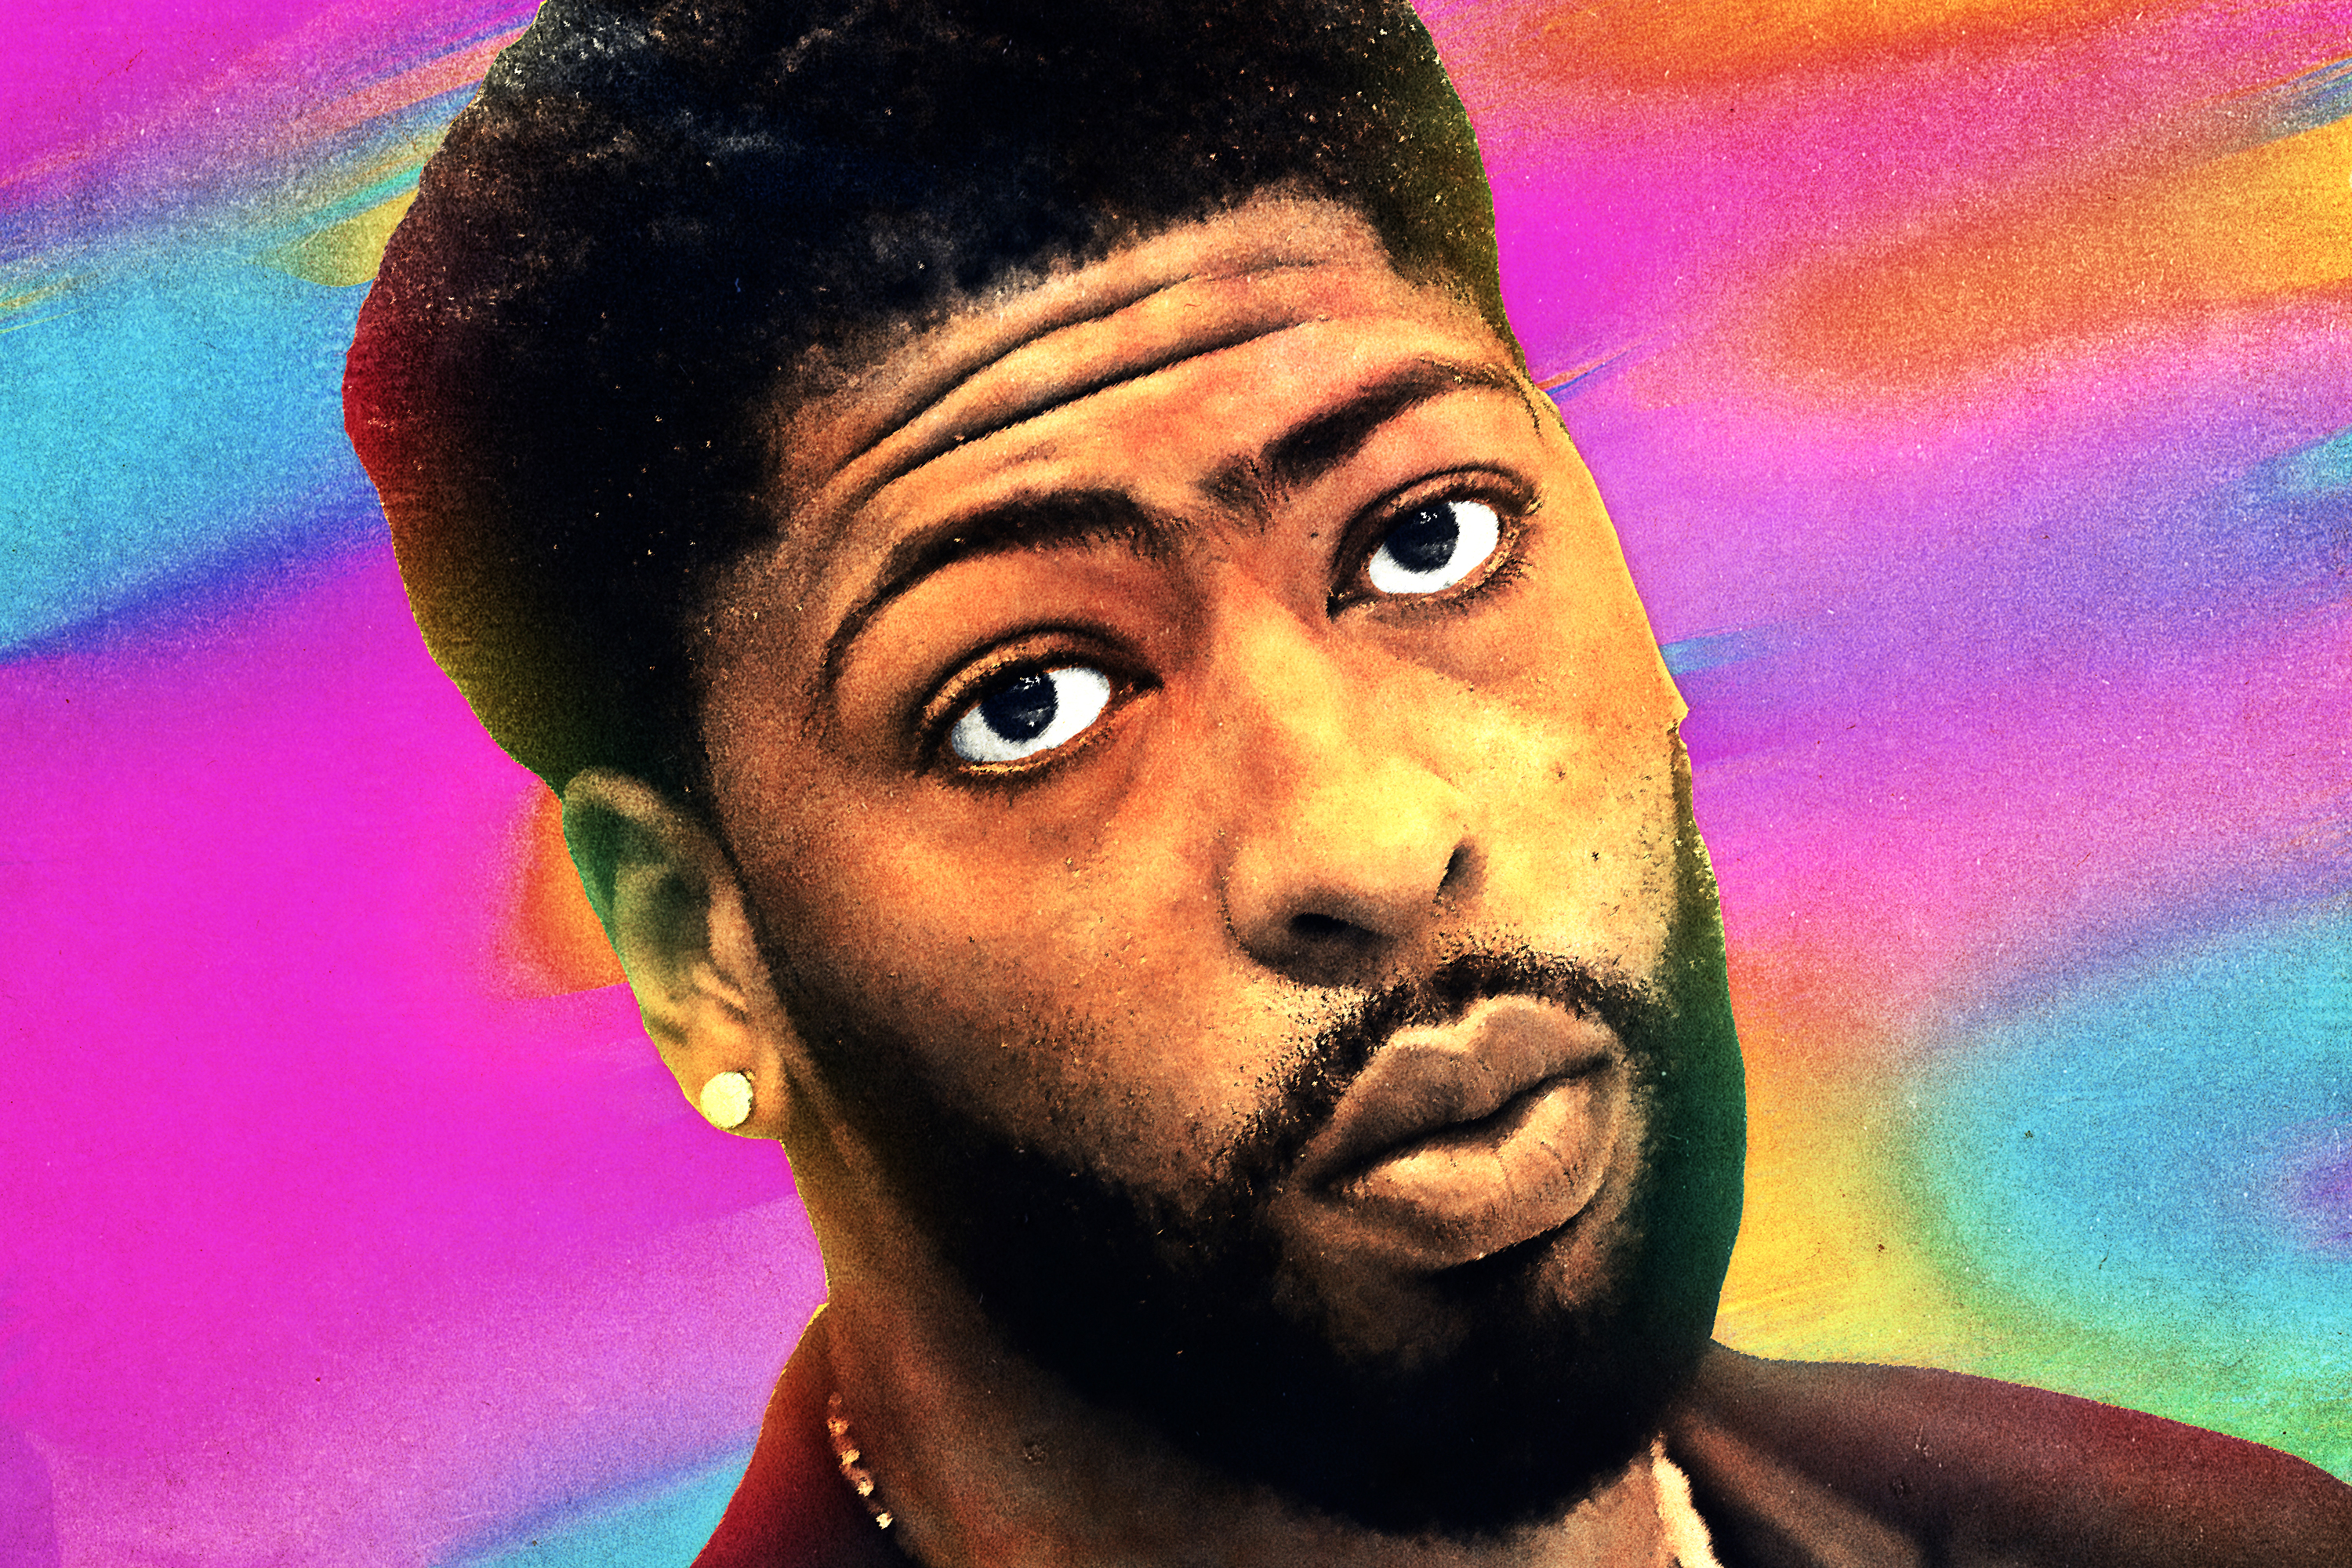 Los Angeles Lakers star Anthony Davis in front of a psychedelic background